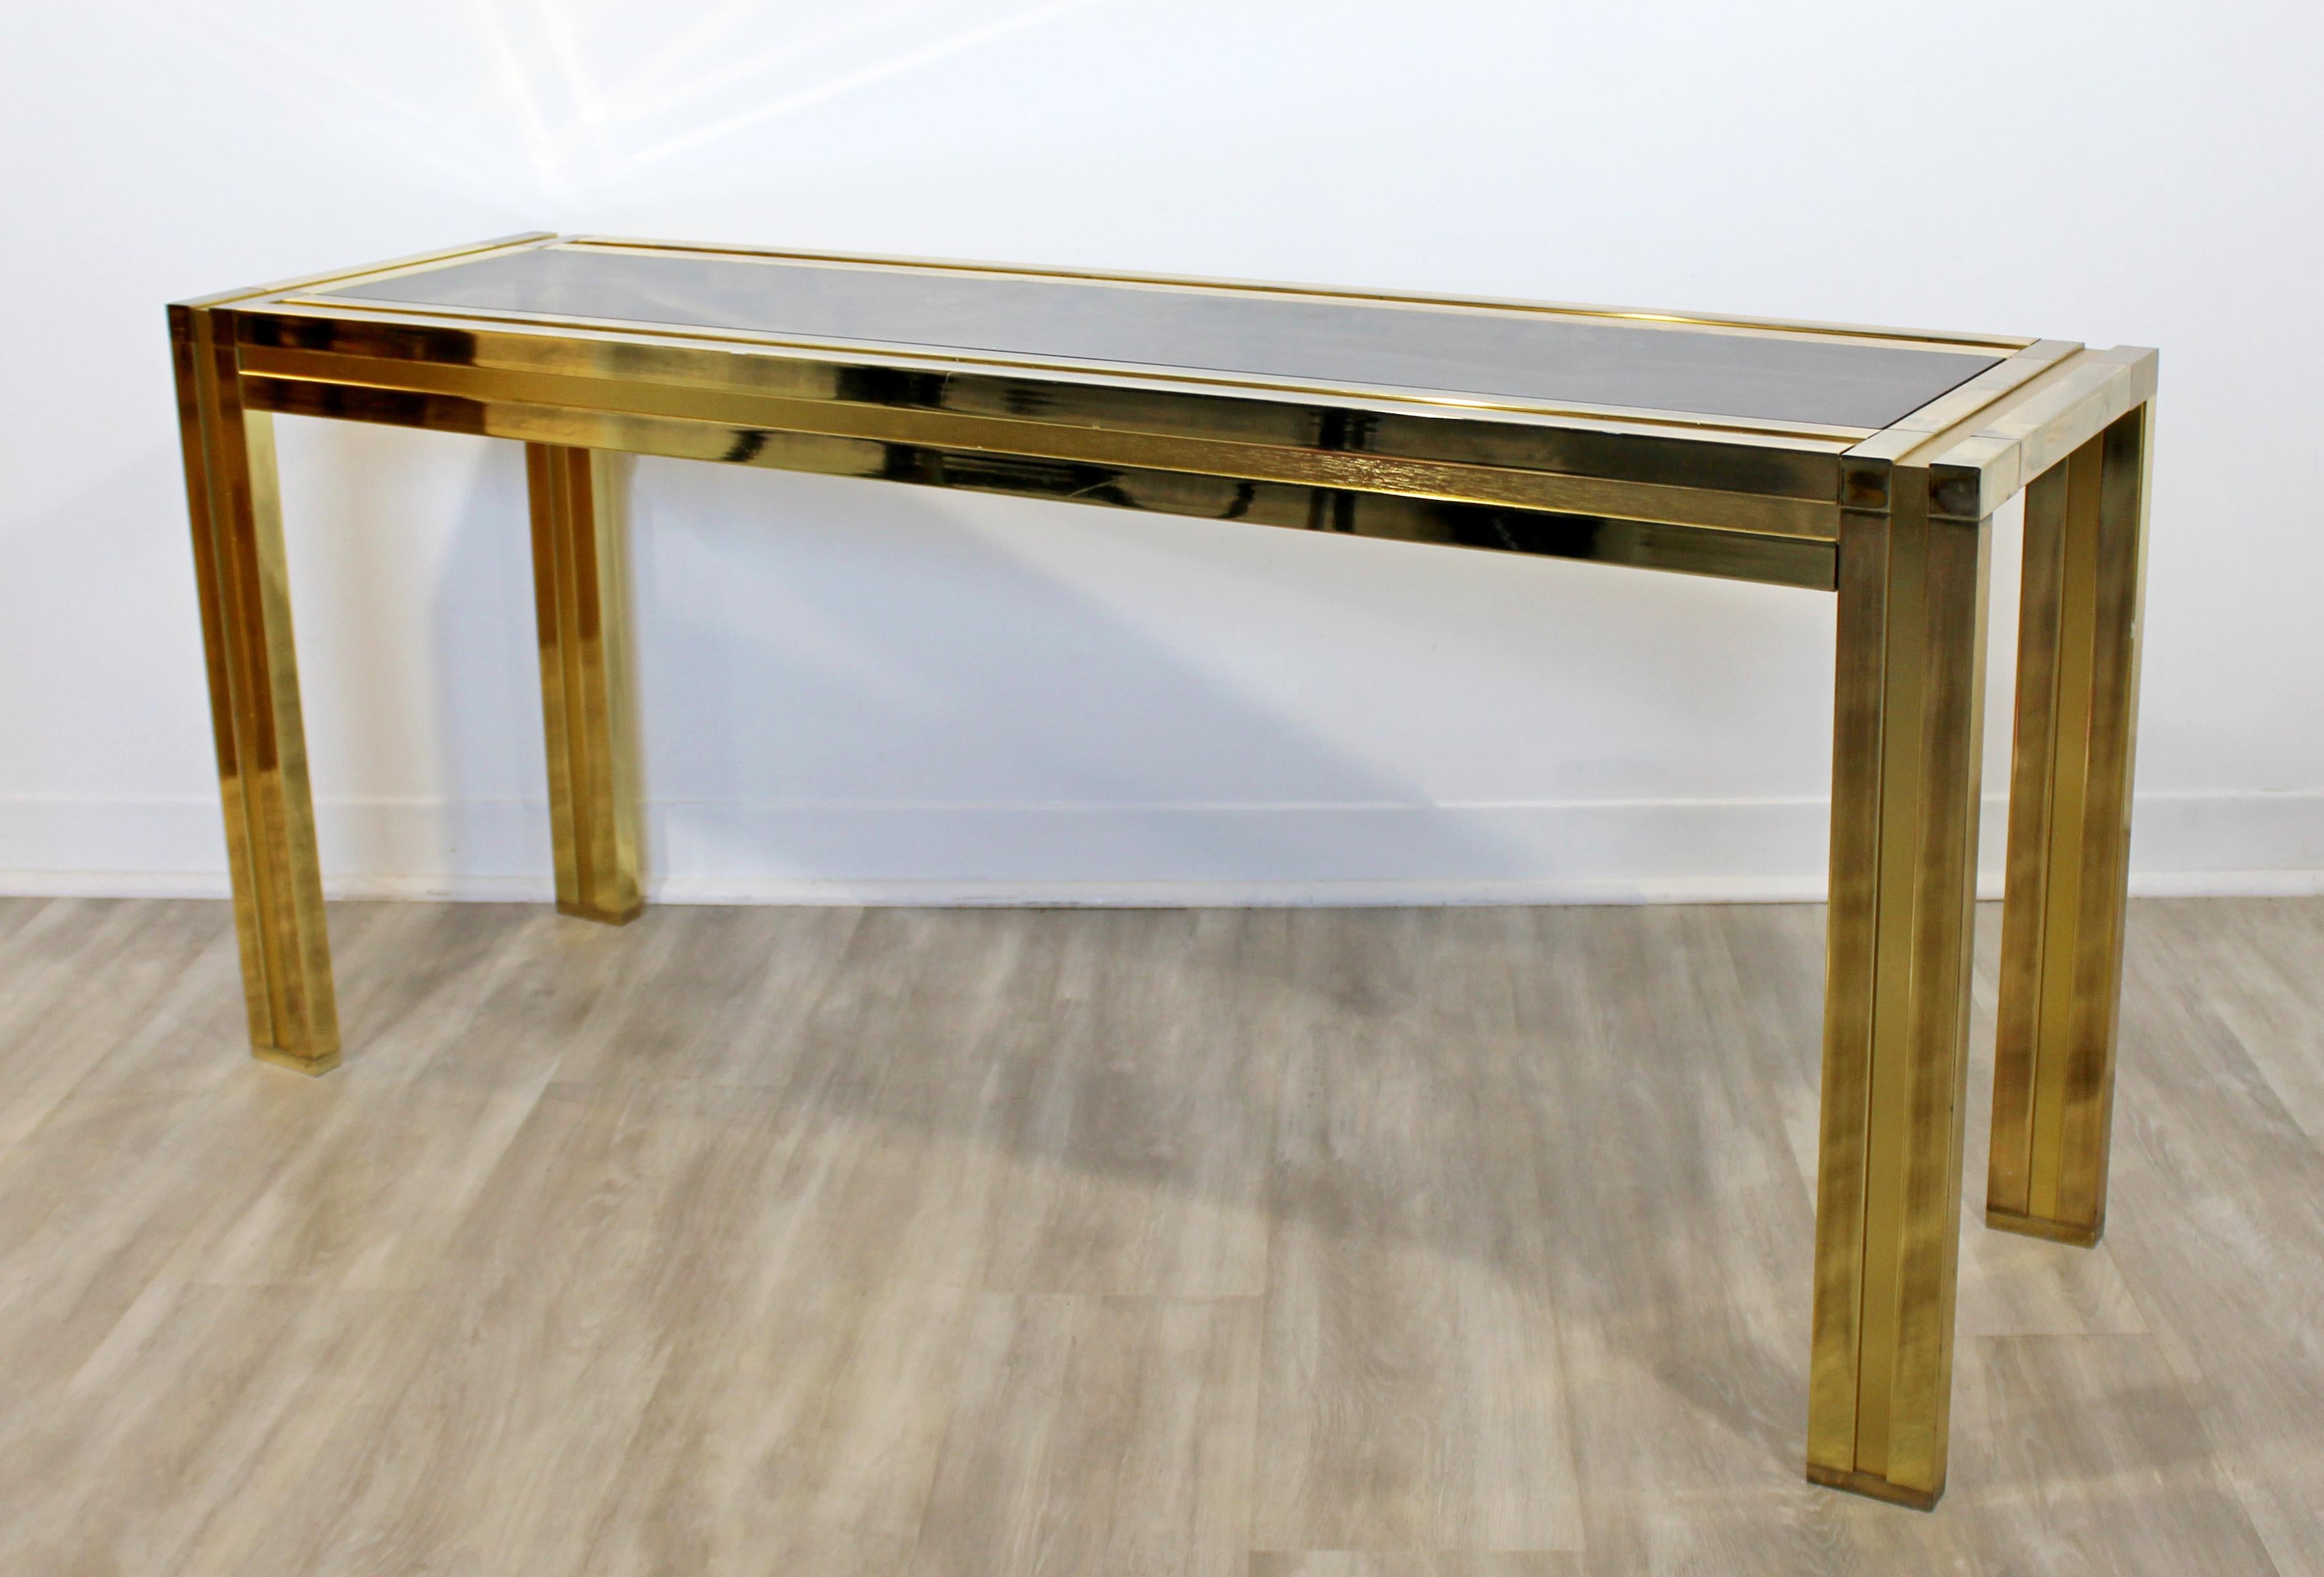 For your consideration is a brilliant, brass console table, with a smoked glass top insert, by Mastercraft, circa 1970s. In excellent vintage condition, with a patina to match its age. The dimensions are 54